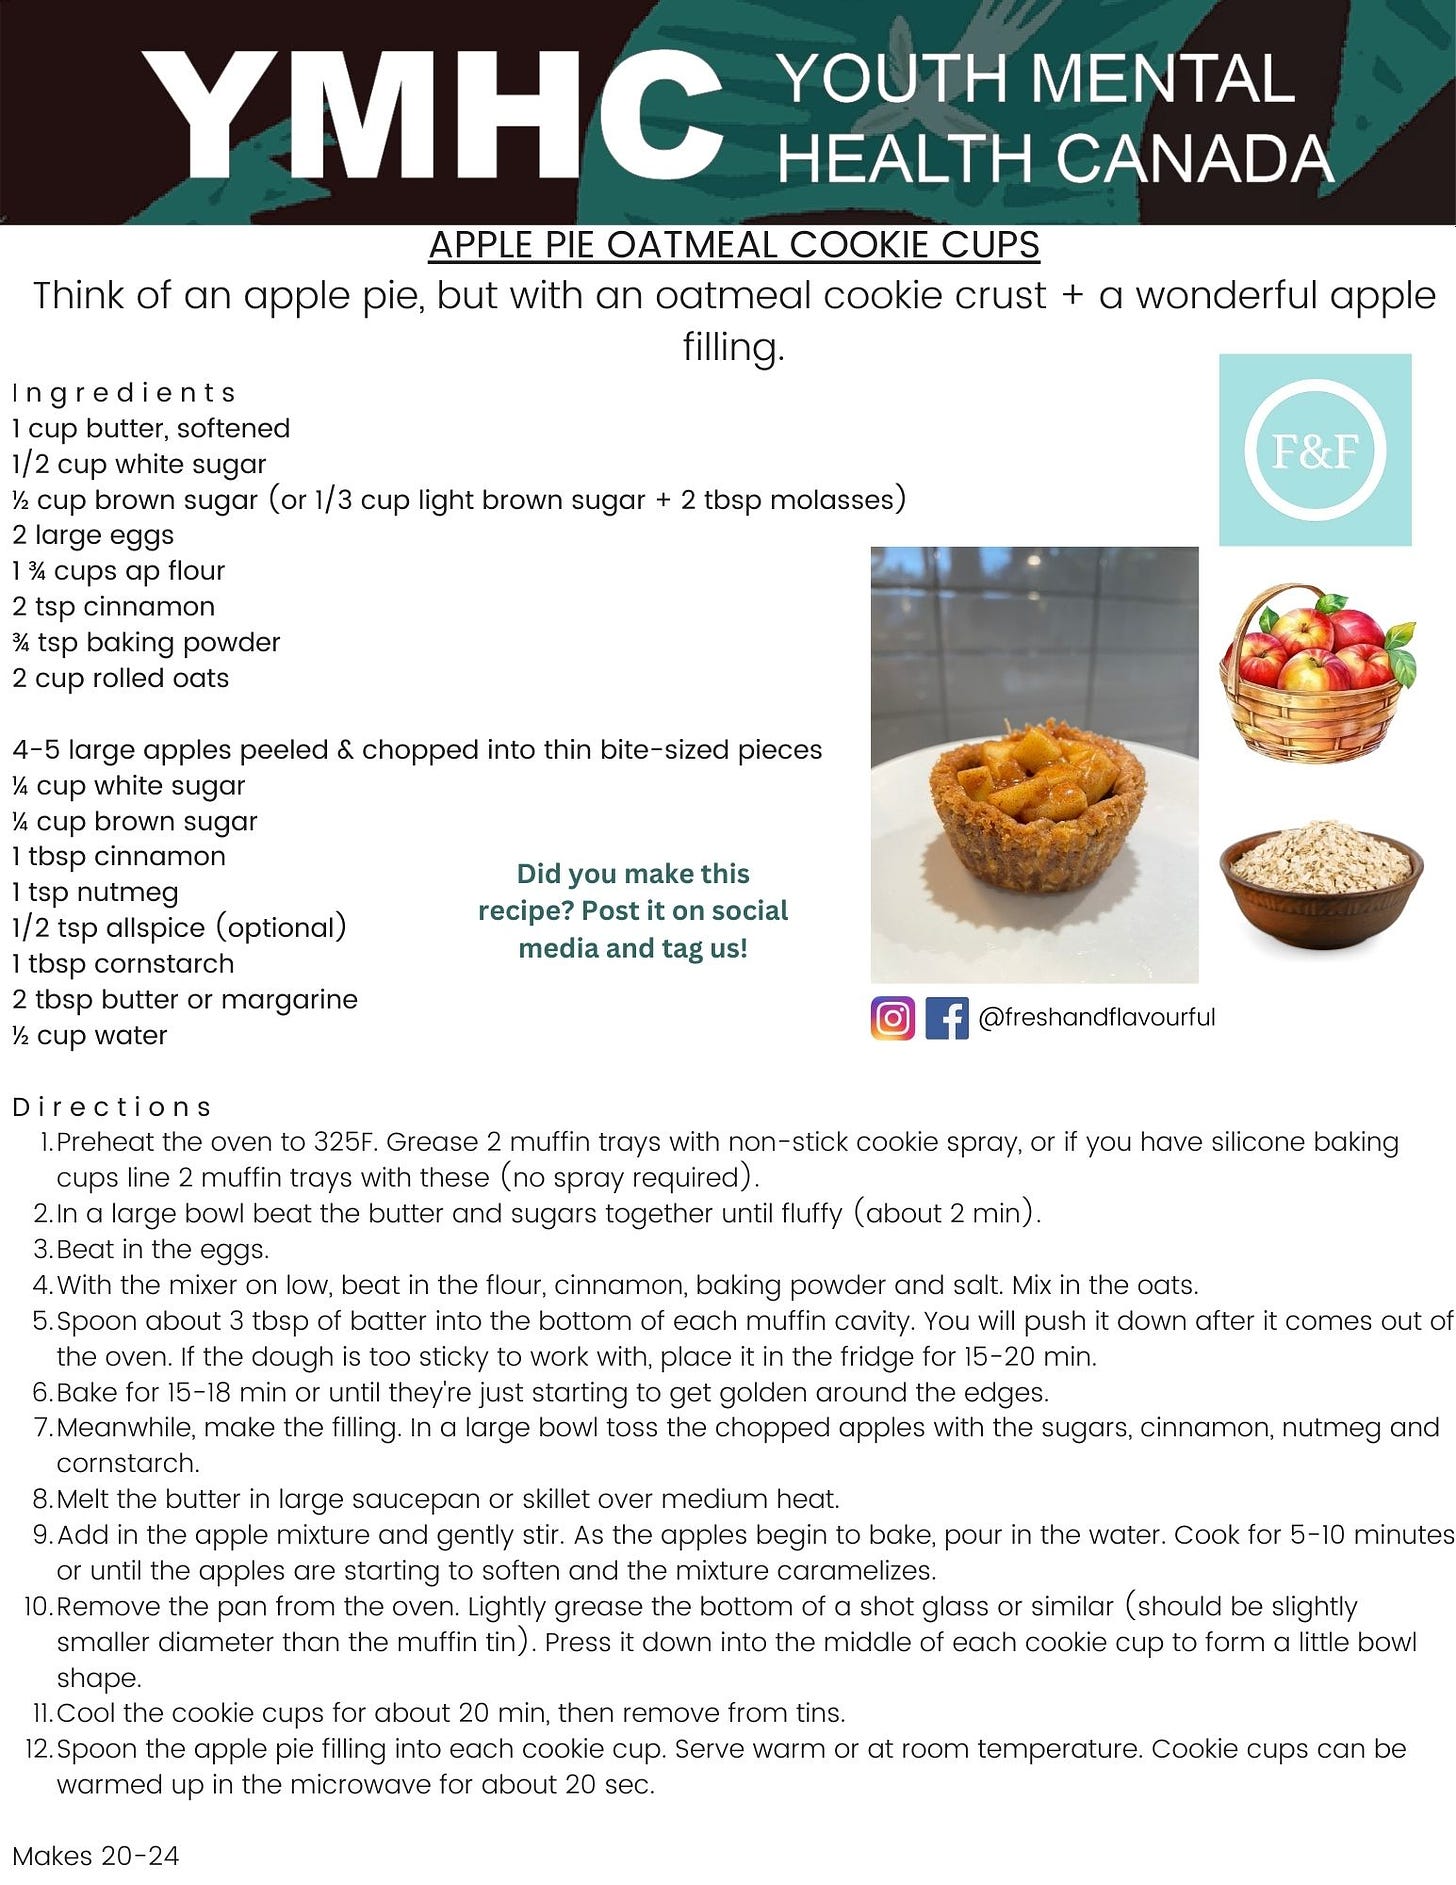 Recipe: Apple Pie Oatmeal Cookie Cups Think of an apple pie, but with an oatmeal cookie crust and a wonderful apple filling.  Ingredients: 1 cup butter, softened 1/2 cup white sugar 1/2 cup brown sugar (or 1/3 cup light brown sugar + 2 tbsp molasses) 2 large eggs 1 3/4 cups all-purpose flour 2 tsp cinnamon 3/4 tsp baking powder 2 cups rolled oats 4-5 large apples, peeled & chopped into thin bite-sized pieces 1/4 cup white sugar 1/4 cup brown sugar 1 tbsp cinnamon 1 tsp nutmeg 1/2 tsp allspice (optional) 1 tbsp cornstarch 2 tbsp butter or margarine 1/2 cup water Directions: Preheat the oven to 325F. Grease 2 muffin trays with non-stick cookie spray or line 2 muffin trays with silicone baking cups (no spray required). In a large bowl, beat the butter and sugars together until fluffy (about 2 min). Beat in the eggs. With the mixer on low, beat in the flour, cinnamon, baking powder, and salt. Mix in the oats. Spoon about 3 tbsp of batter into the bottom of each muffin cavity. You will push it down after it comes out of the oven. If the dough is too sticky to work with, place it in the fridge for 15-20 min. Bake for 15-18 min or until they're just starting to get golden around the edges. Meanwhile, make the filling. In a large bowl, toss the chopped apples with the sugars, cinnamon, nutmeg, and cornstarch. Melt the butter in a large saucepan or skillet over medium heat. Add the apple mixture and gently stir. As the apples begin to bake, pour in the water. Cook for 5-10 minutes or until the apples are starting to soften and the mixture caramelizes. Remove the pan from the oven. Lightly grease the bottom of a shot glass or similar item (slightly smaller diameter than the muffin tin). Press it down into the middle of each cookie cup to form a little bowl shape. Cool the cookie cups for about 20 min, then remove from tins. Spoon the apple pie filling into each cookie cup. Serve warm or at room temperature. Cookie cups can be warmed up in the microwave for about 20 sec. Makes 20-24. Did you make this recipe? Post it on social media and tag us!